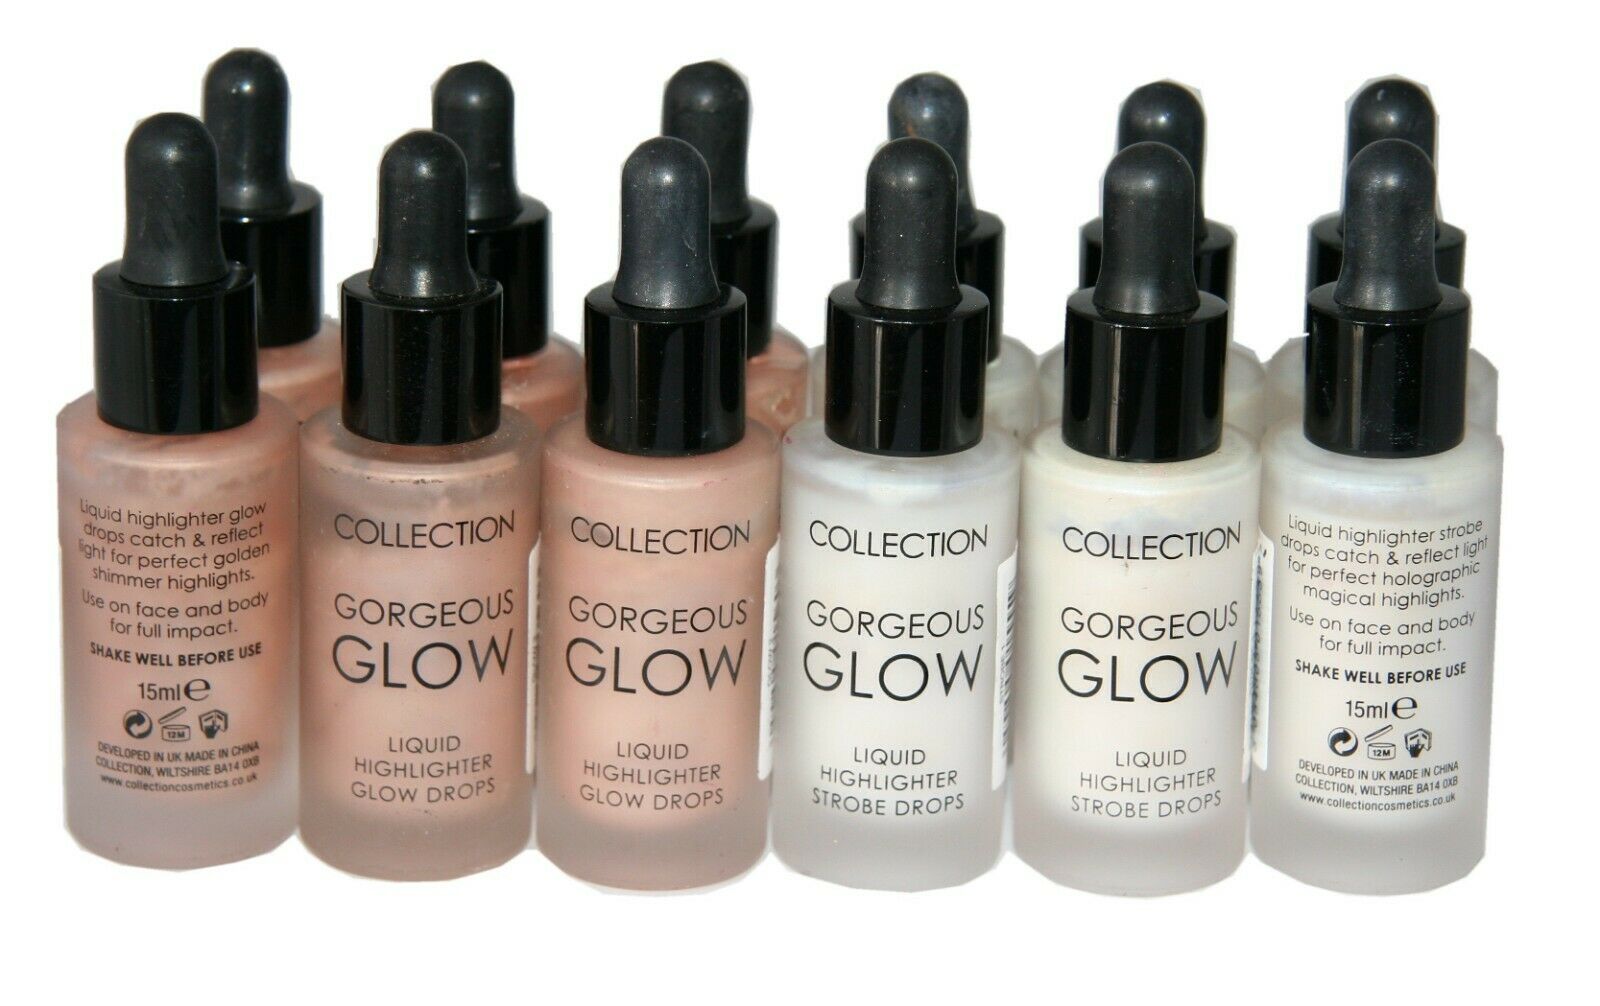 48 x Collection Gorgeous Glow Liquid Highlighter Drops | Strobe 1 and Glow 2 |